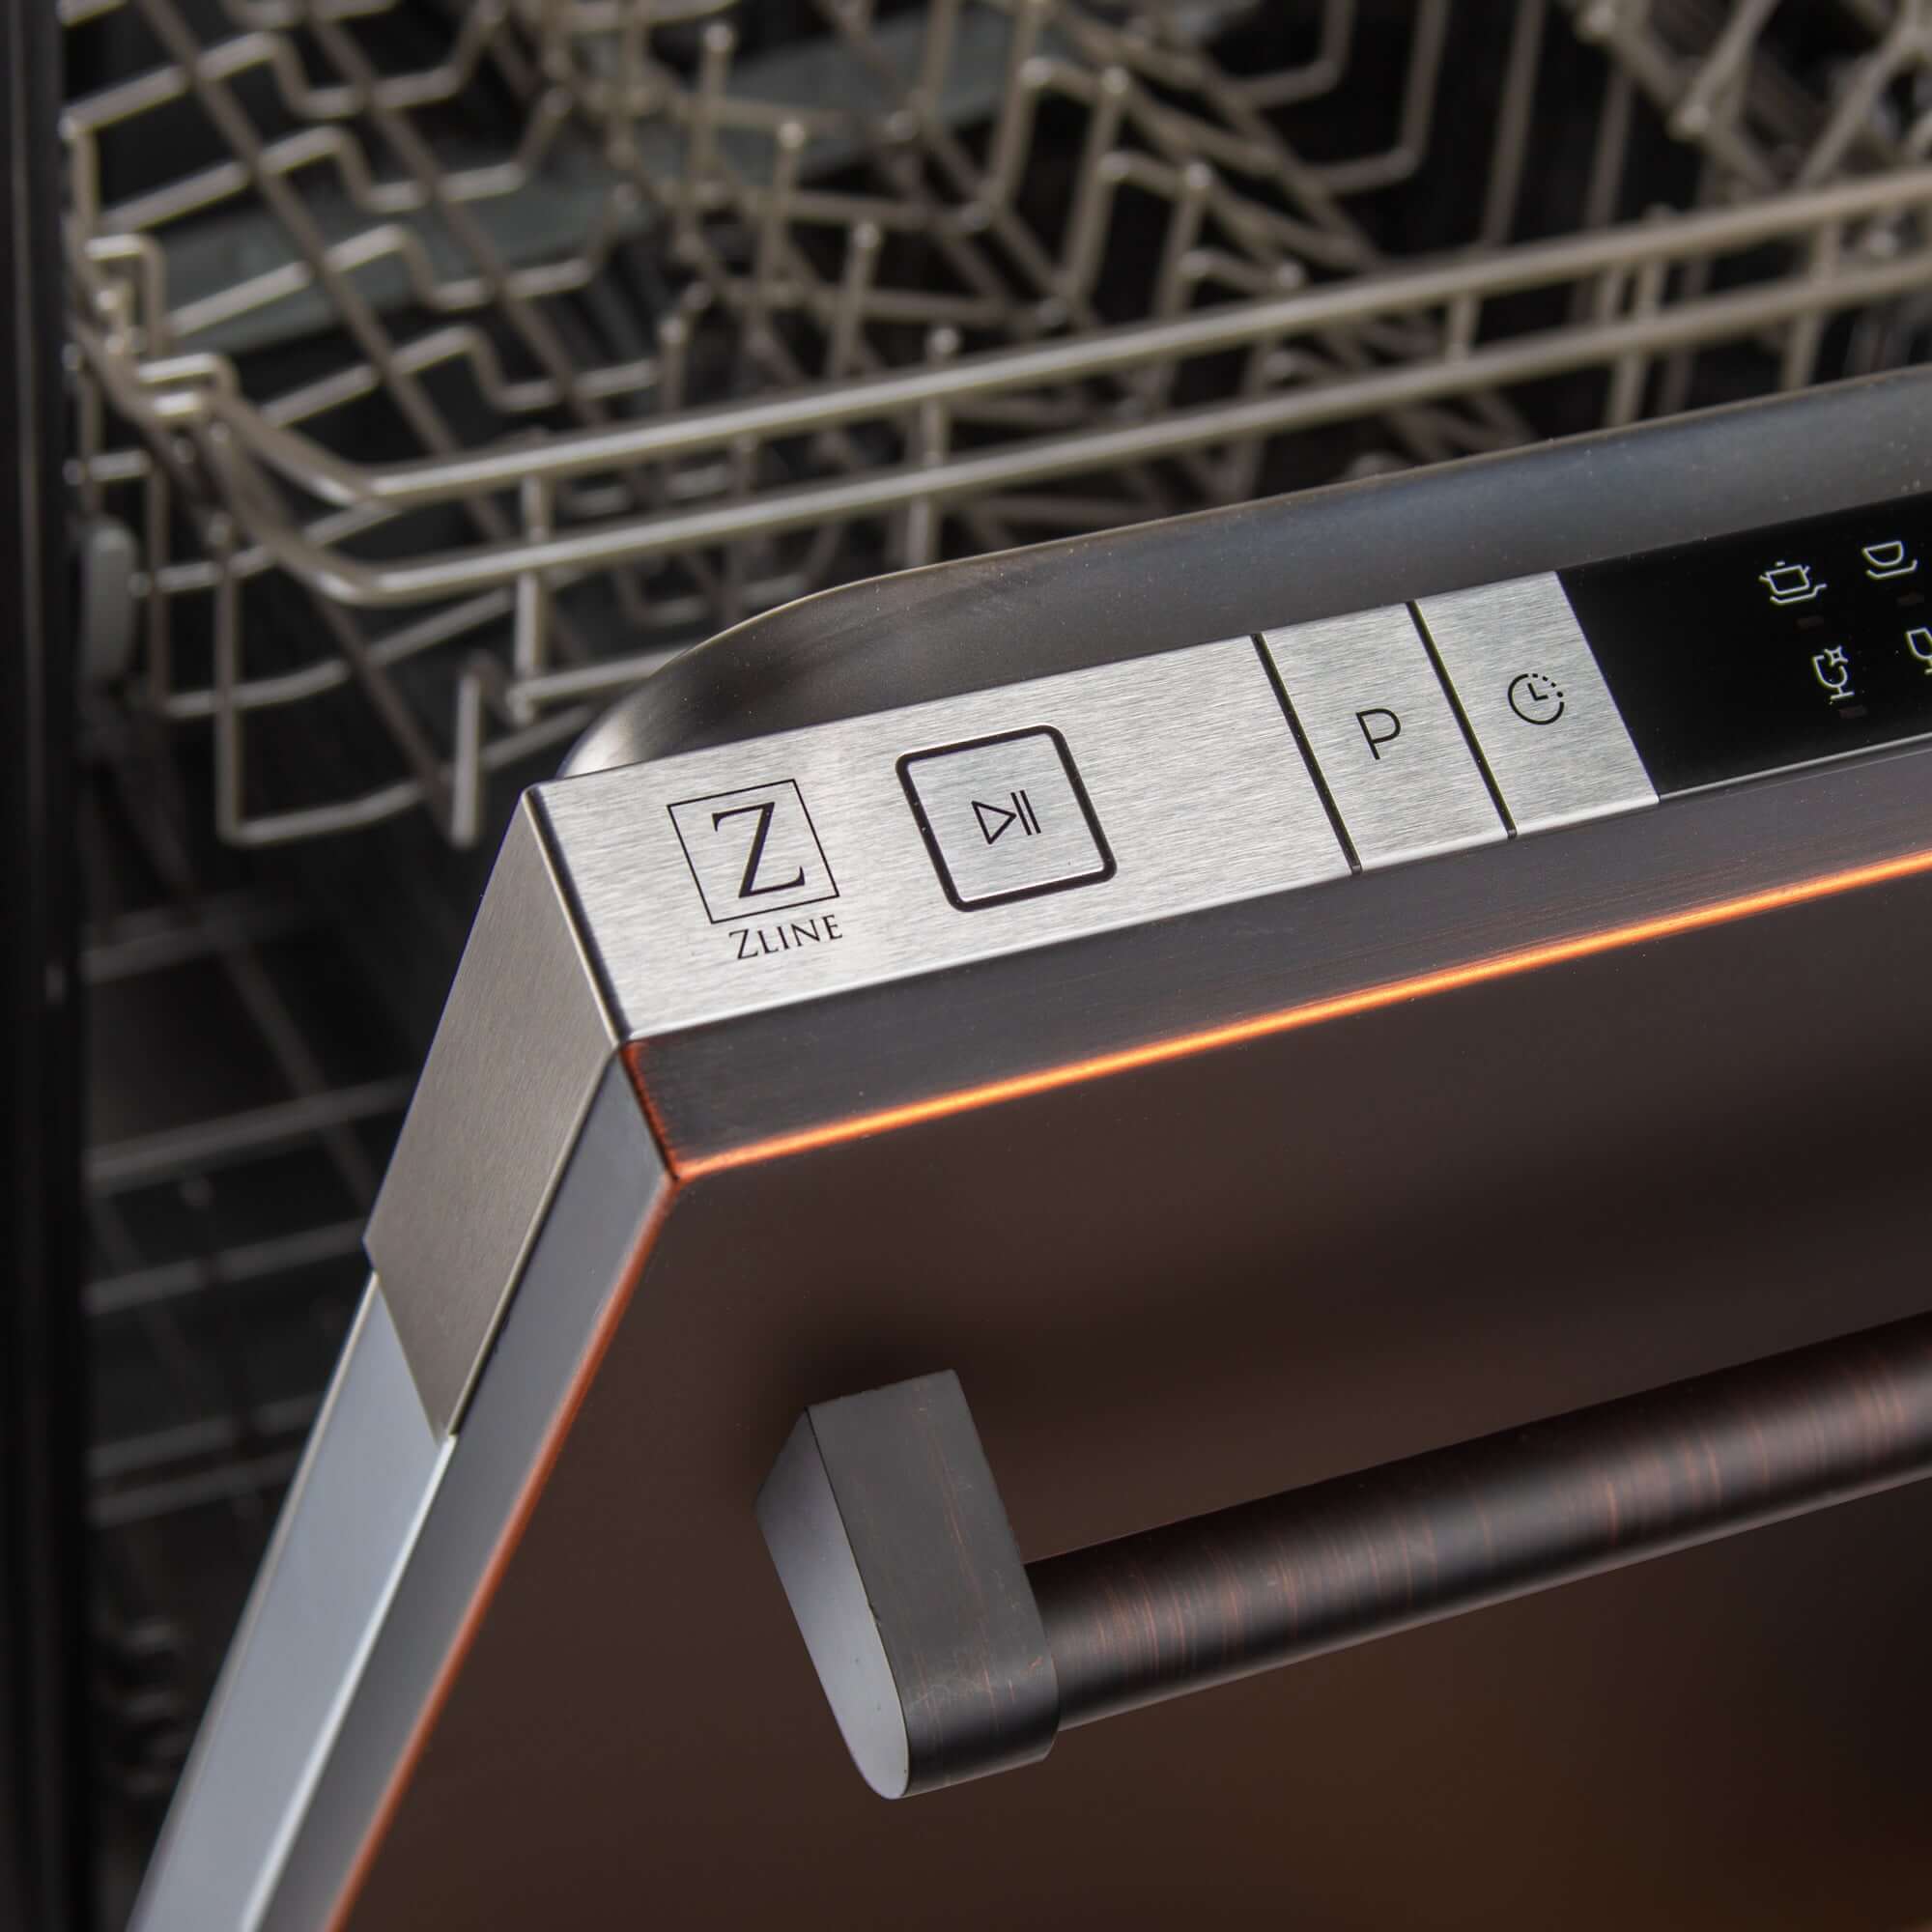 ZLINE 18 in. Compact Oil-Rubbed Bronze Top Control Built-In Dishwasher with Stainless Steel Tub and Traditional Style Handle, 52dBa (DW-ORB-H-18)